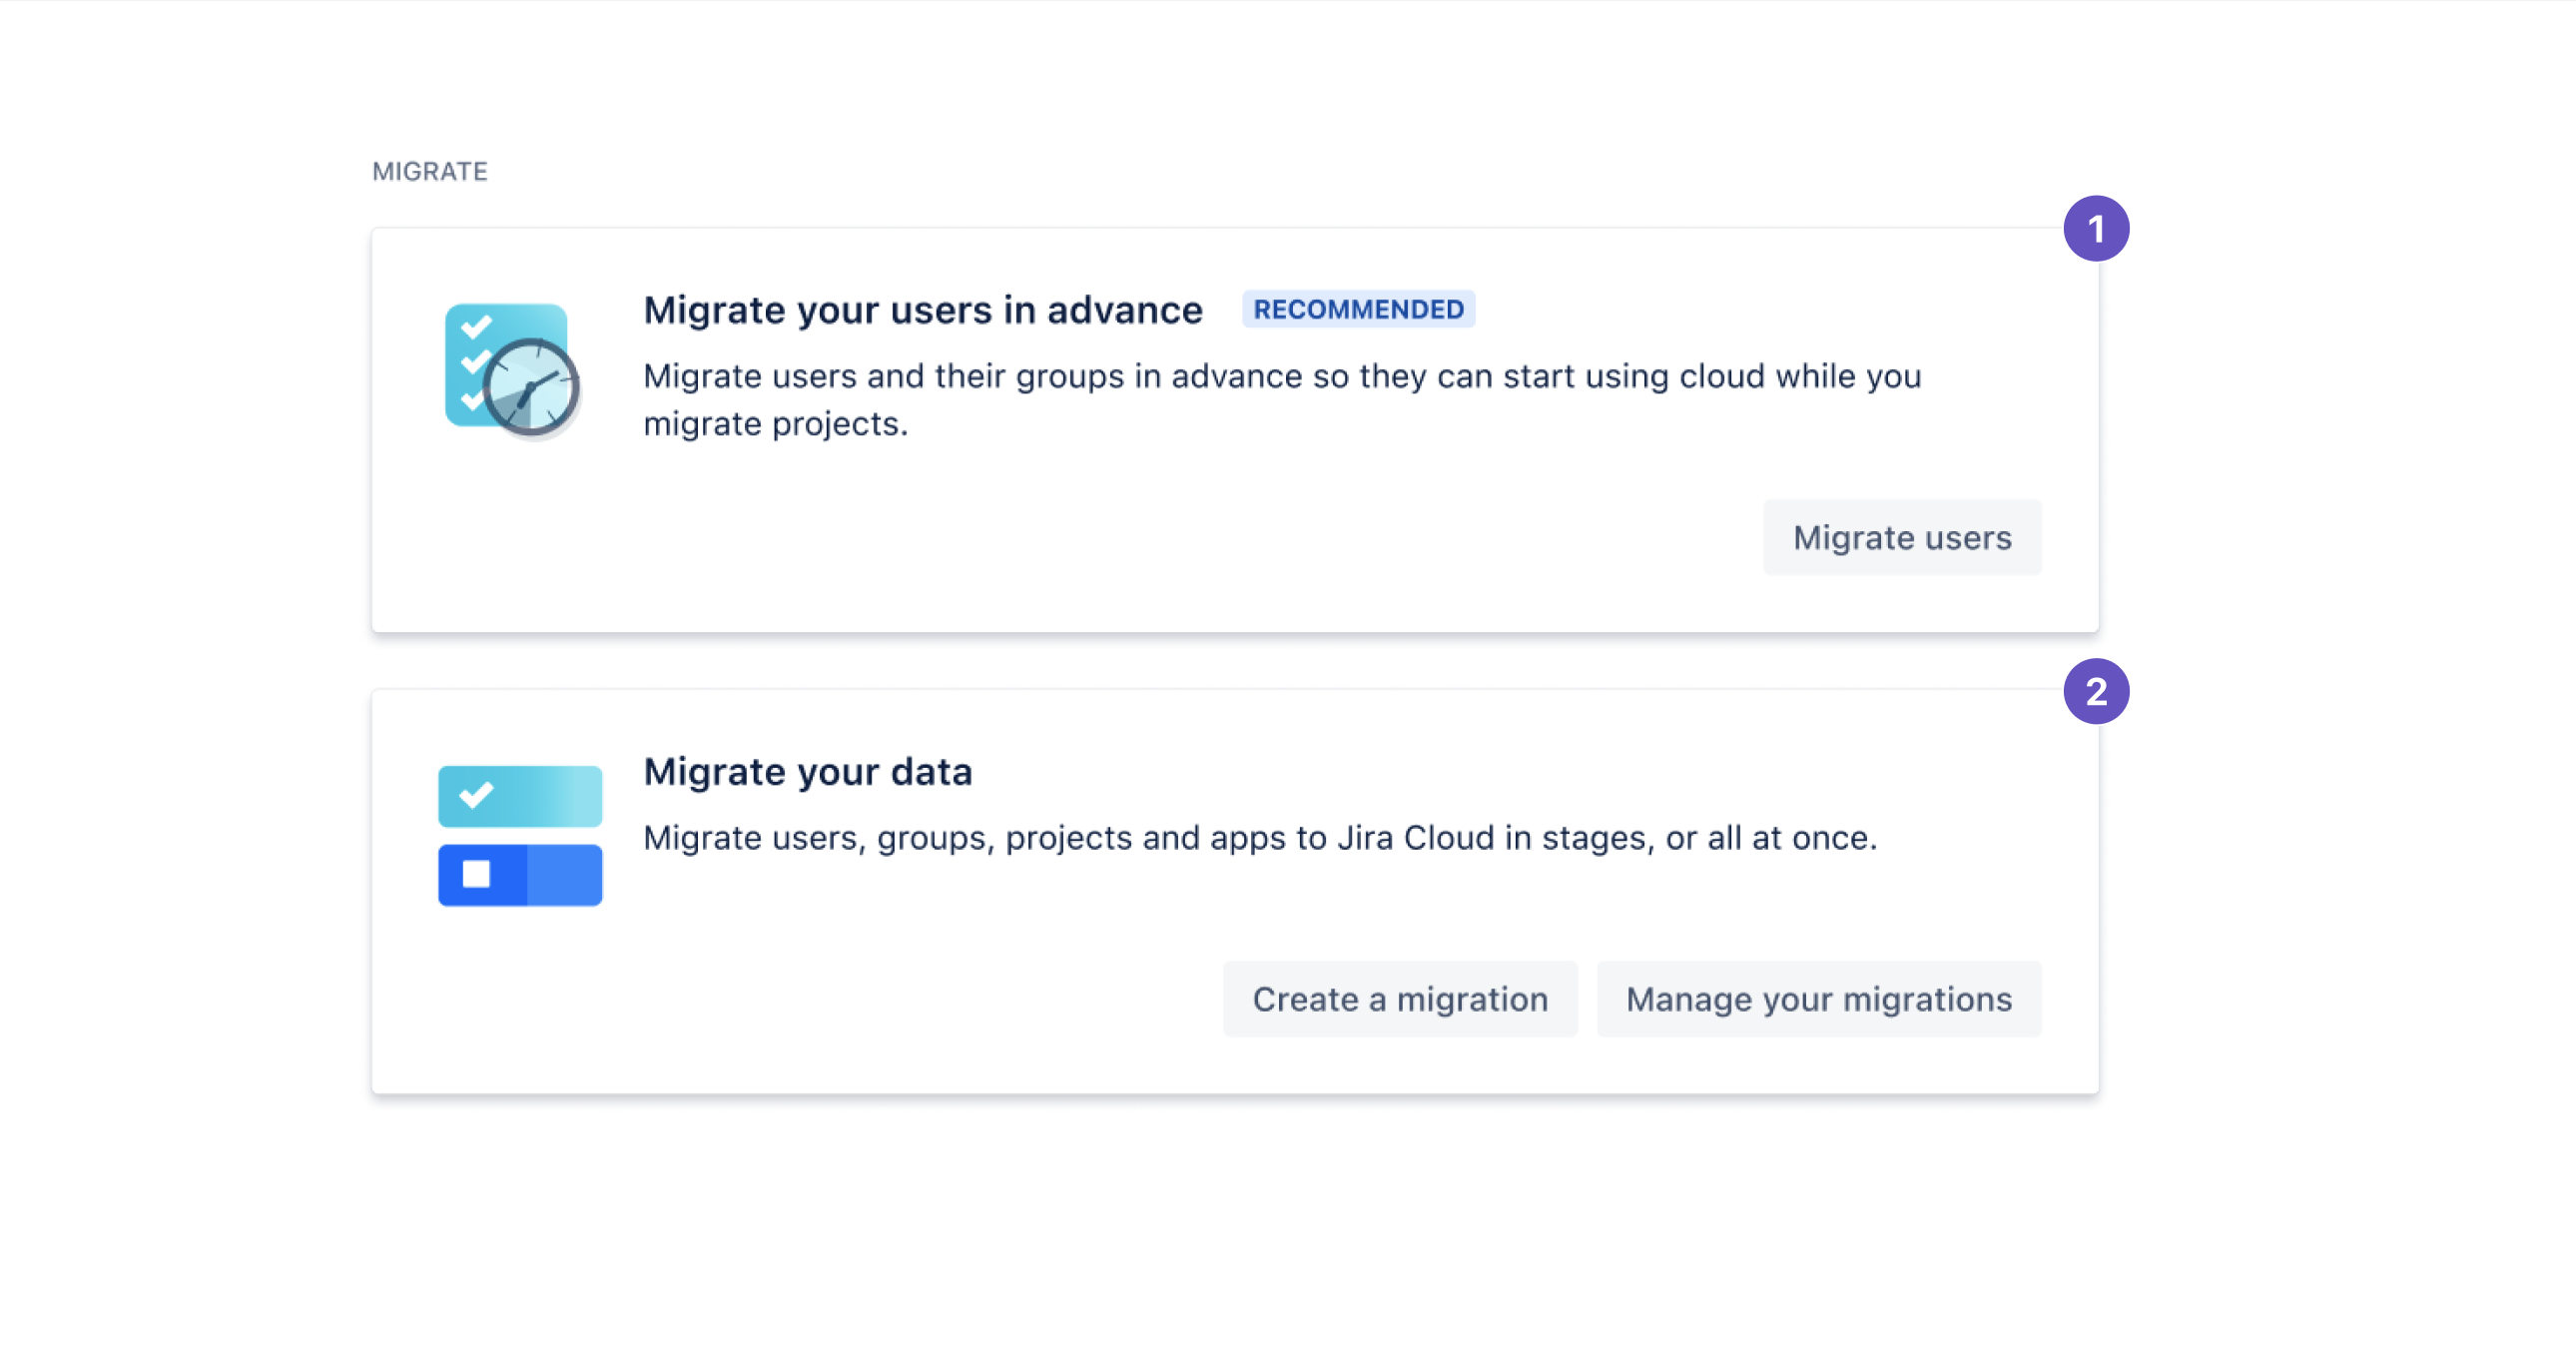 Options to migrate users separately or together with data, as shown on the home screen.